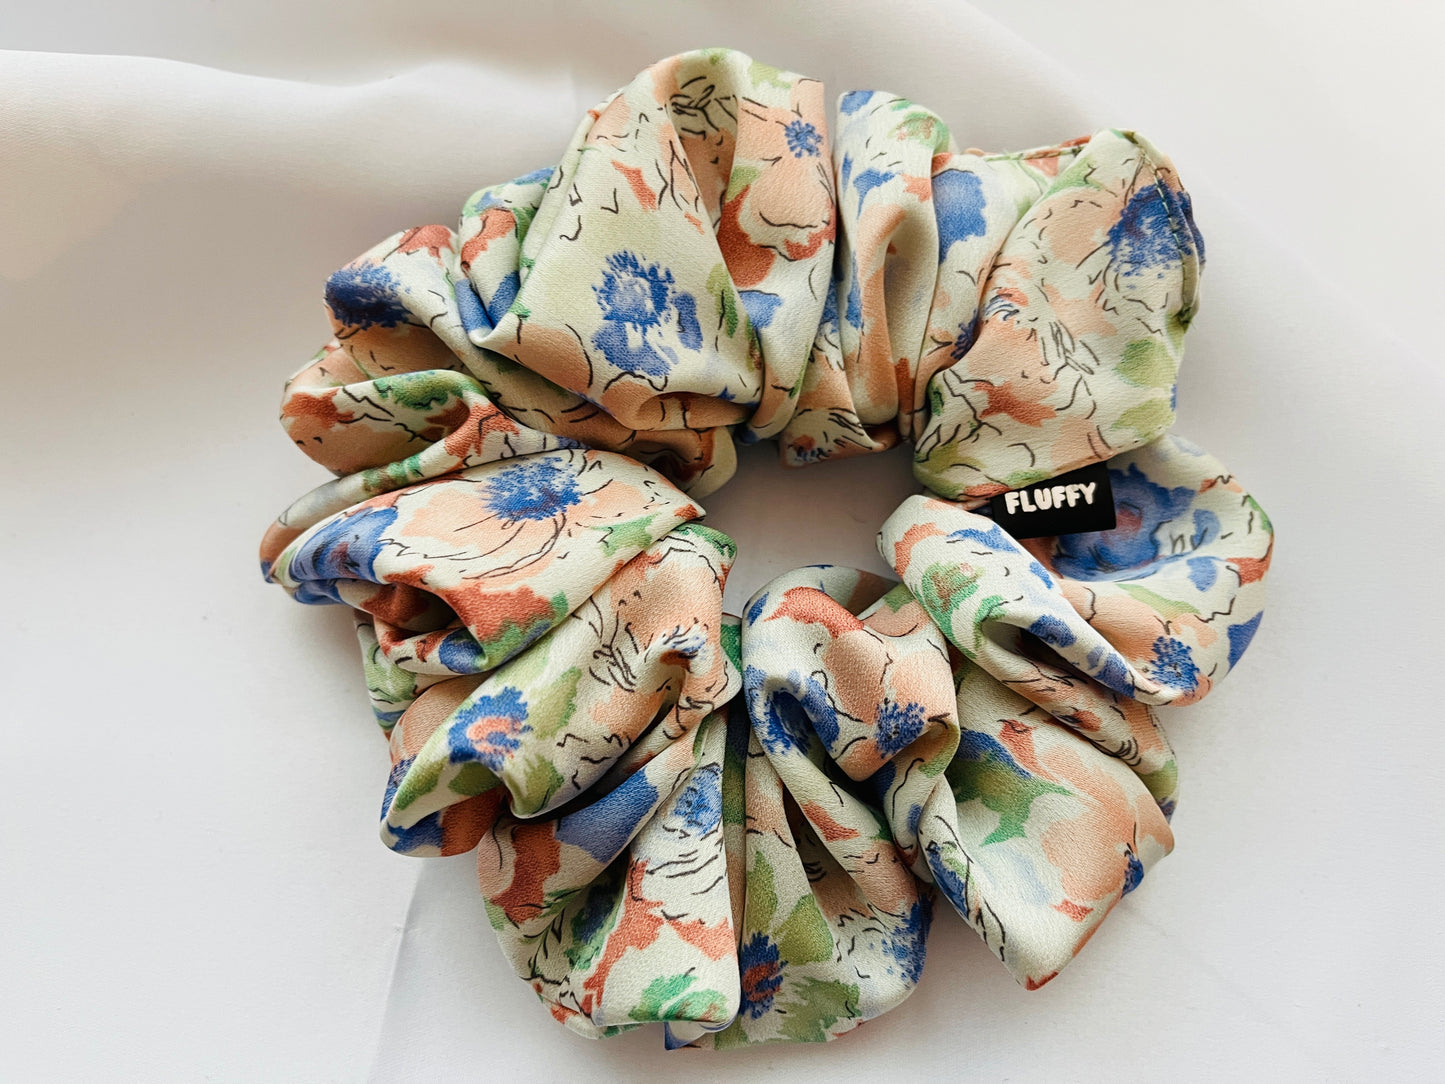 You are seeing our satin scrunchies in 3 sizes..  The sizes of our Satin Scrunchies are Large, Medium and Mini.  Simply select the size you want in the drop down menu and add them to the card.   Our Satin Scrunchies are perfect for all hair types and every person. We have multiple colors and sizes available